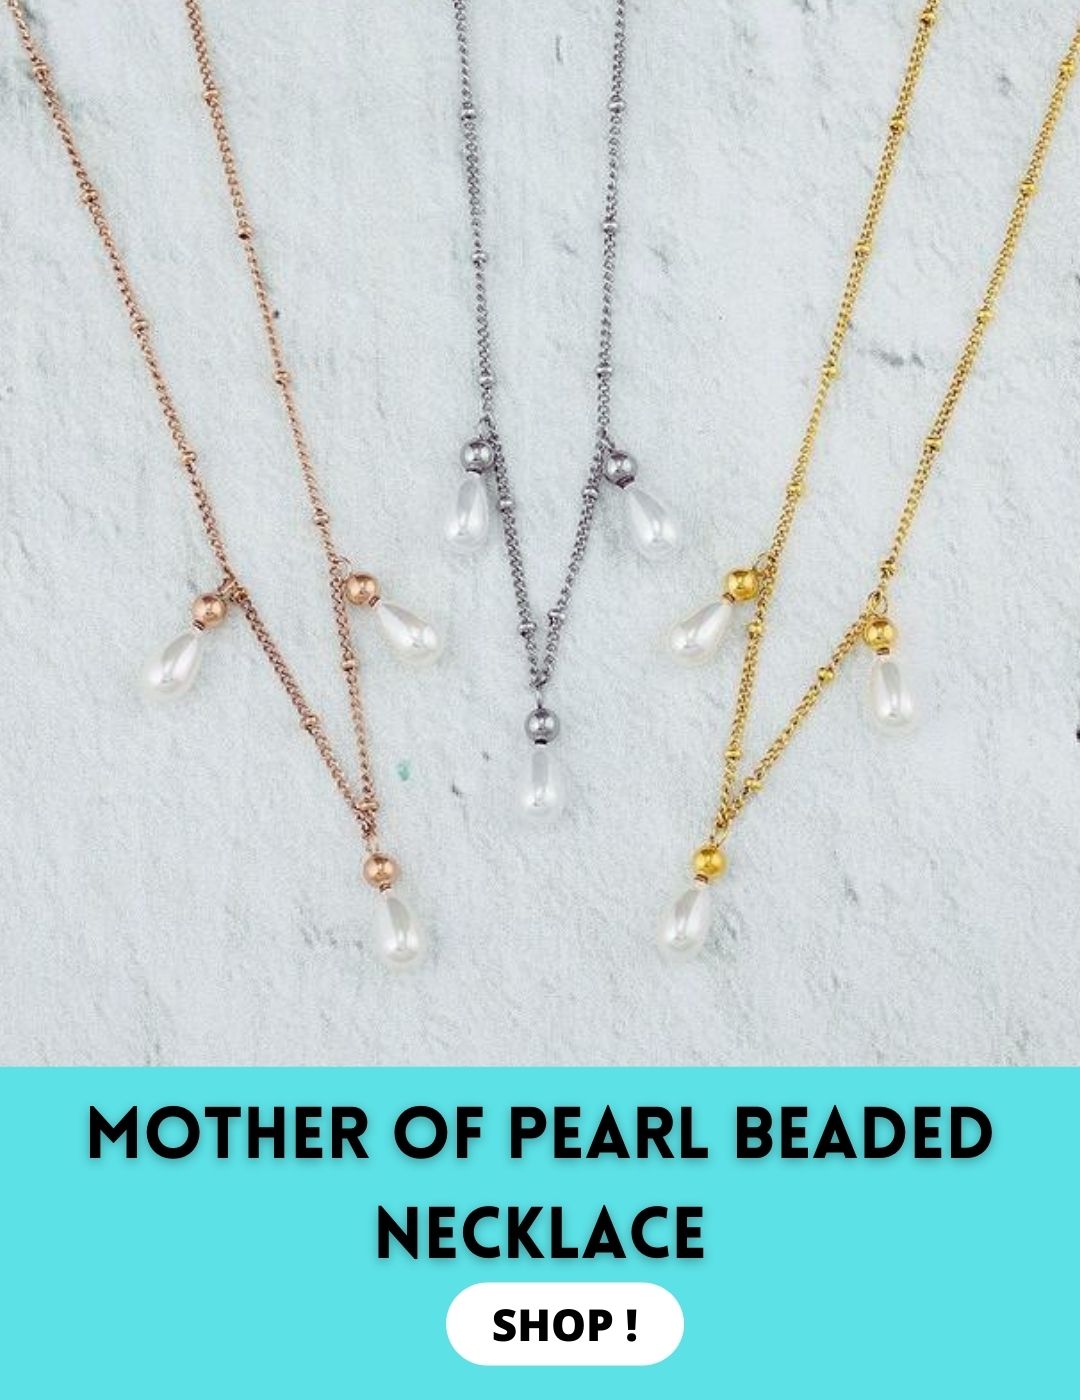 Meaning of pearls